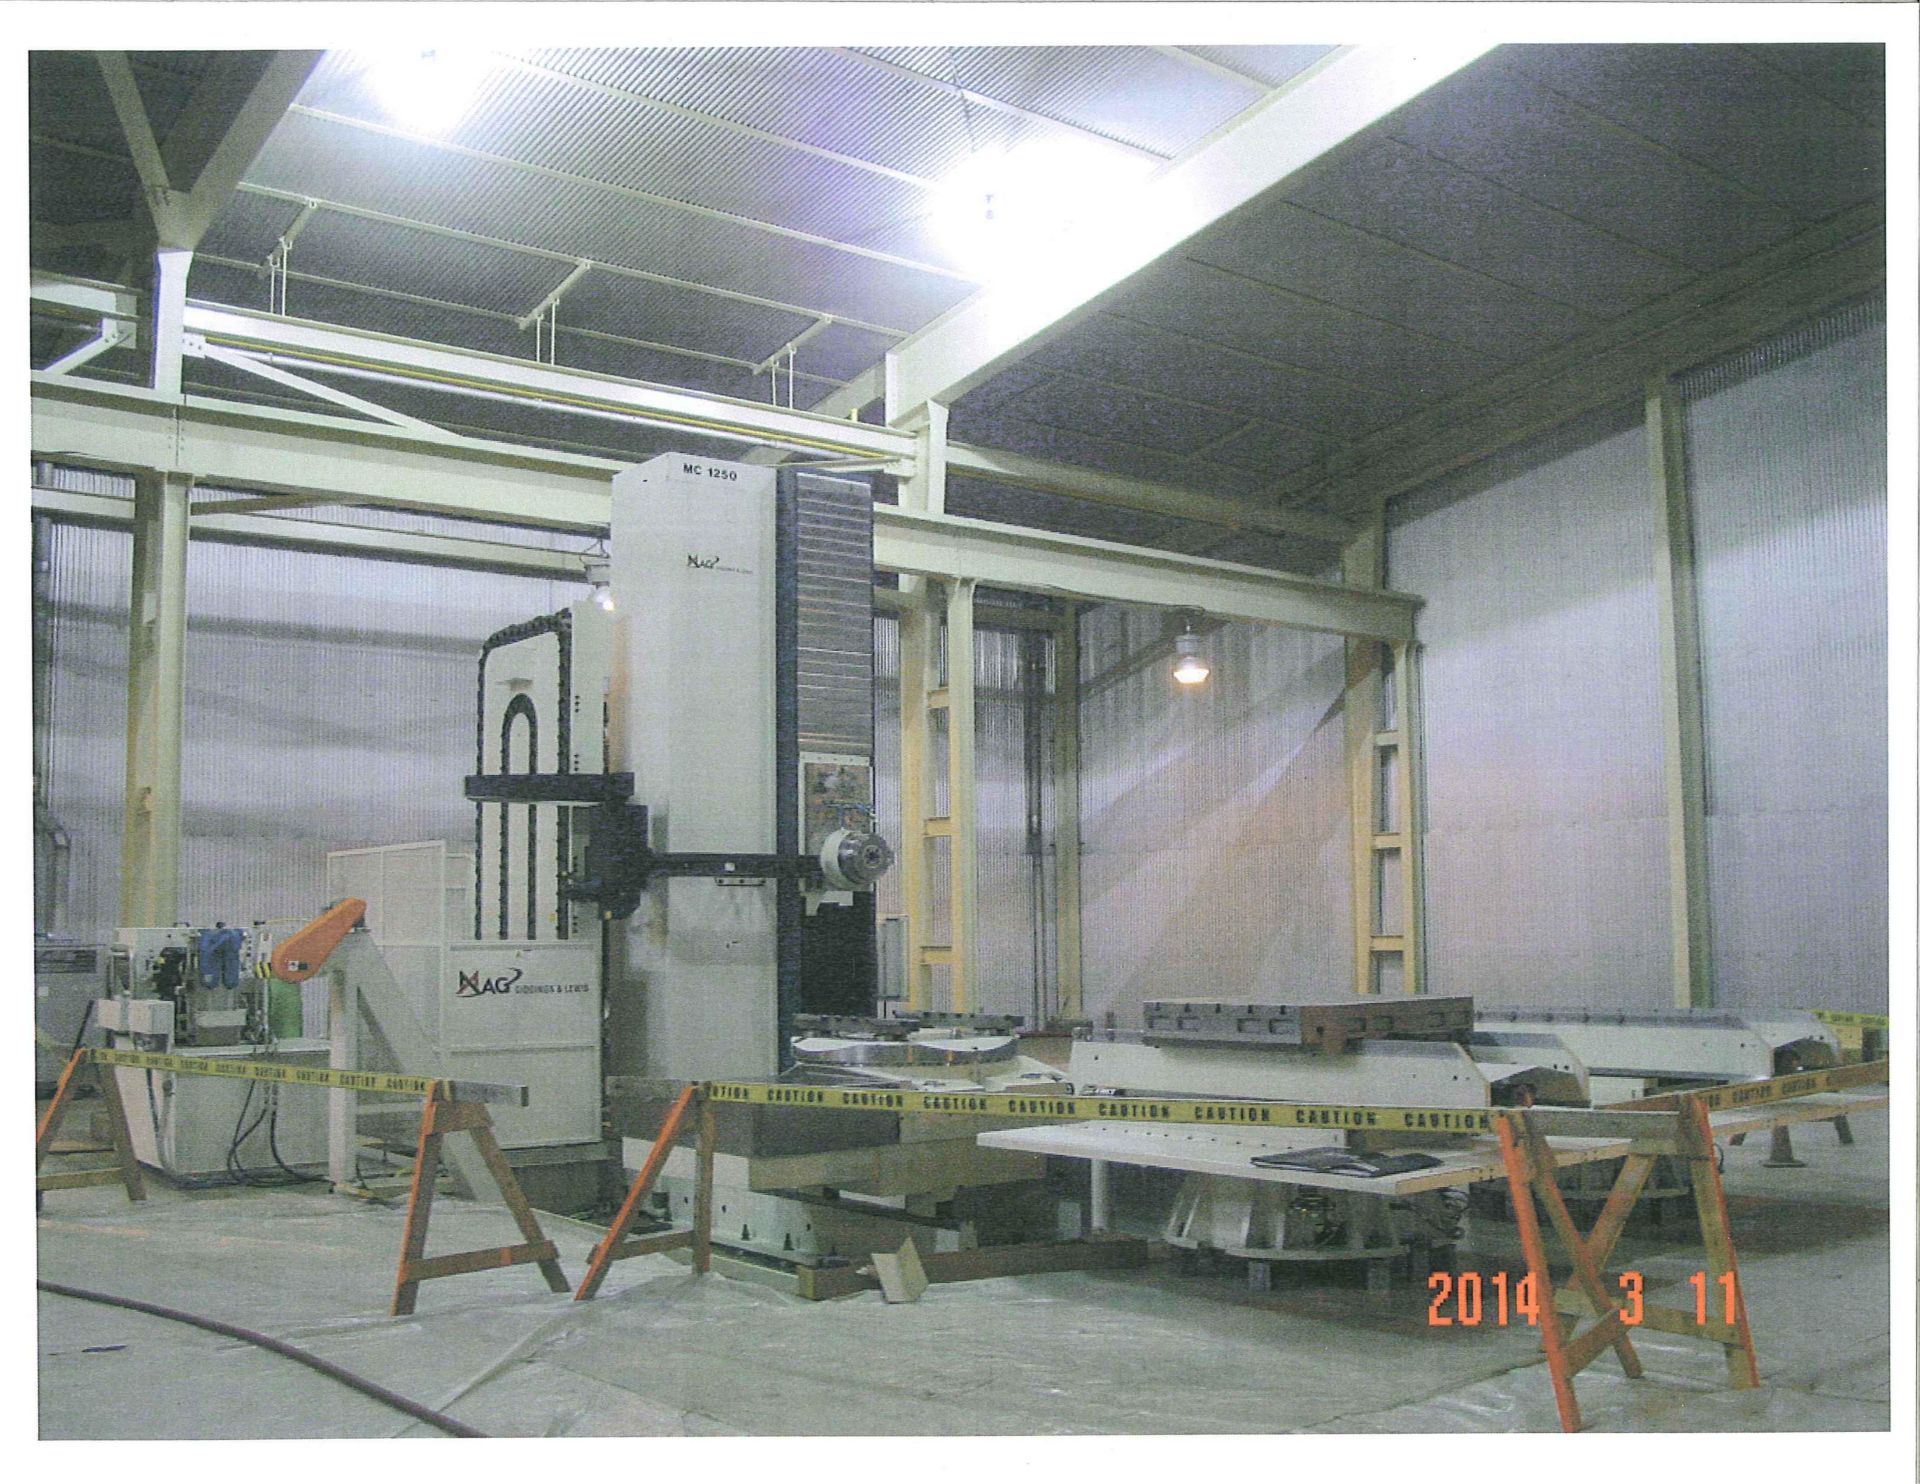 **6.1" GIDDINGS & LEWIS MODEL MC-1250 FIVE-AXIS TWO-PALLET ROTARY TABLE CNC HORIZONTAL BORING MILL; - Image 11 of 40